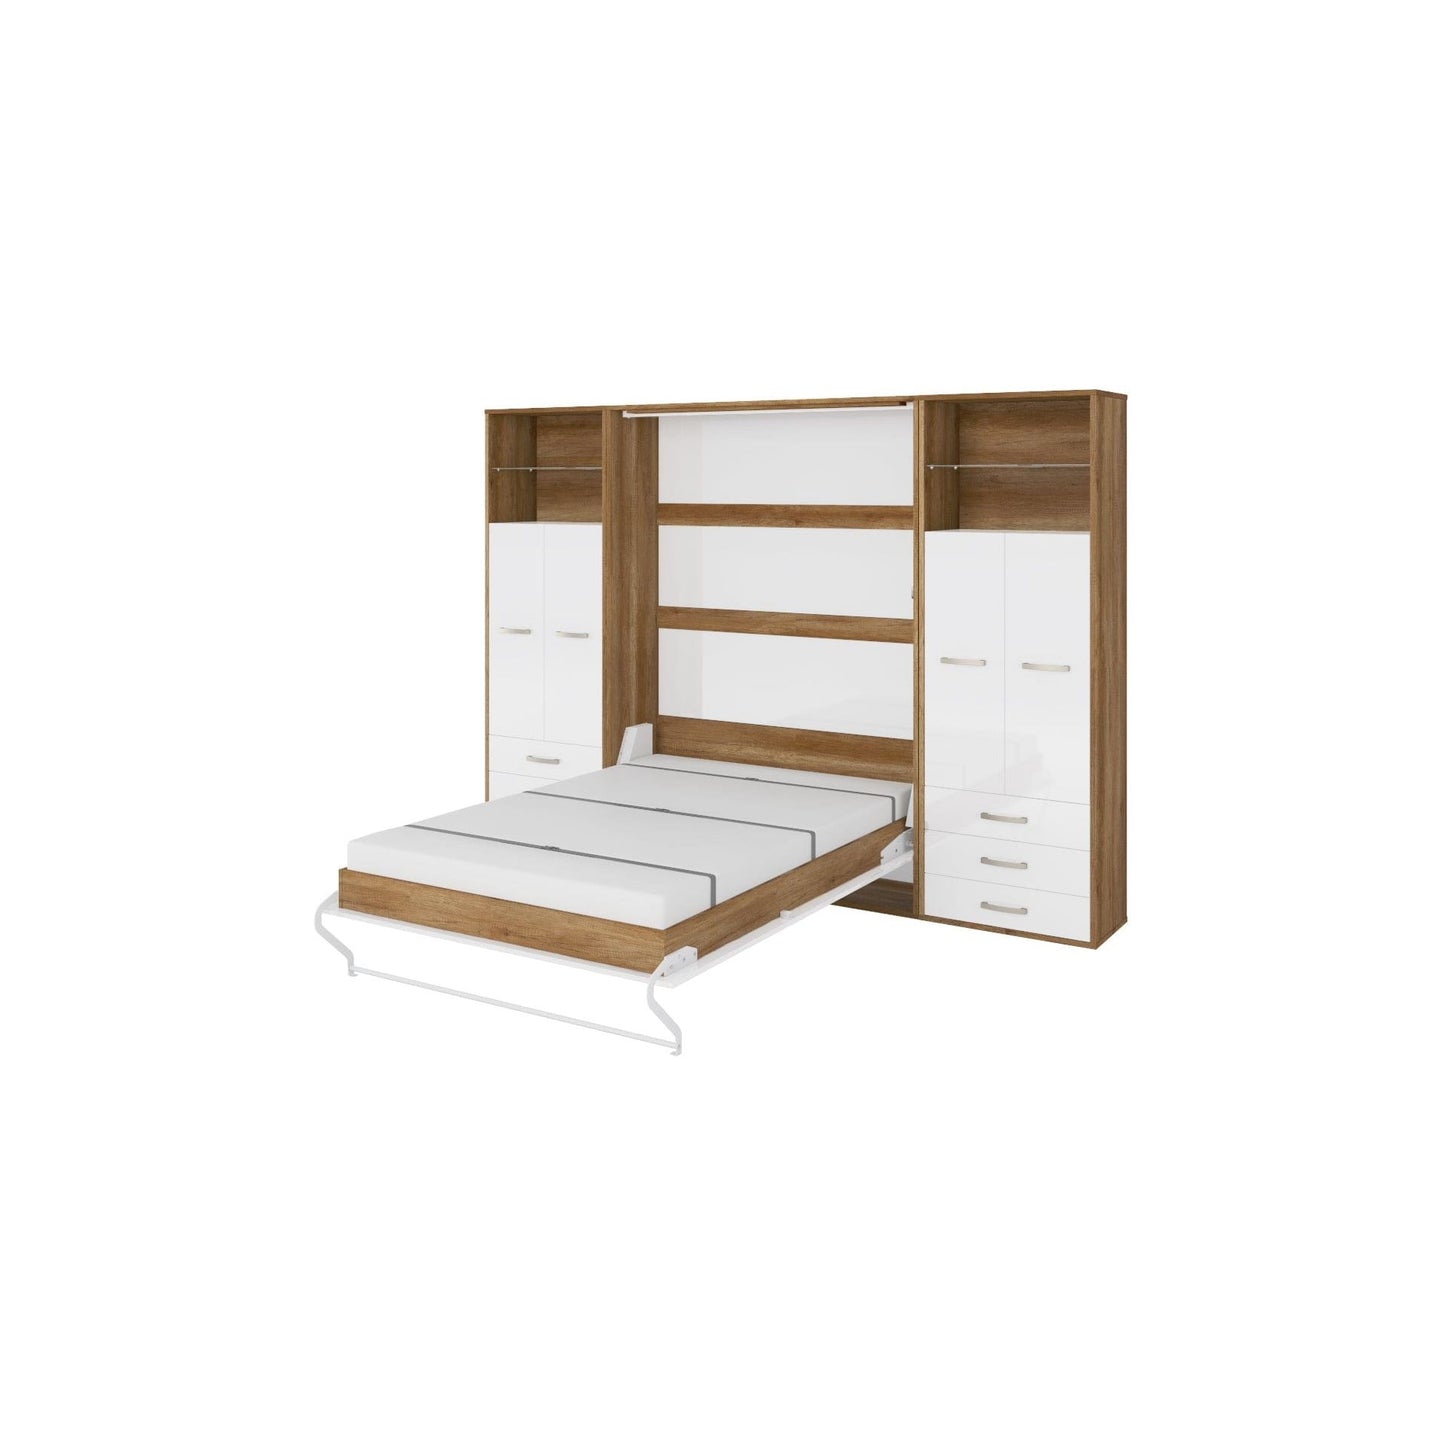 Maxima House Maxima House Vertical Wall Bed Invento, European Full Size with 2 cabinets